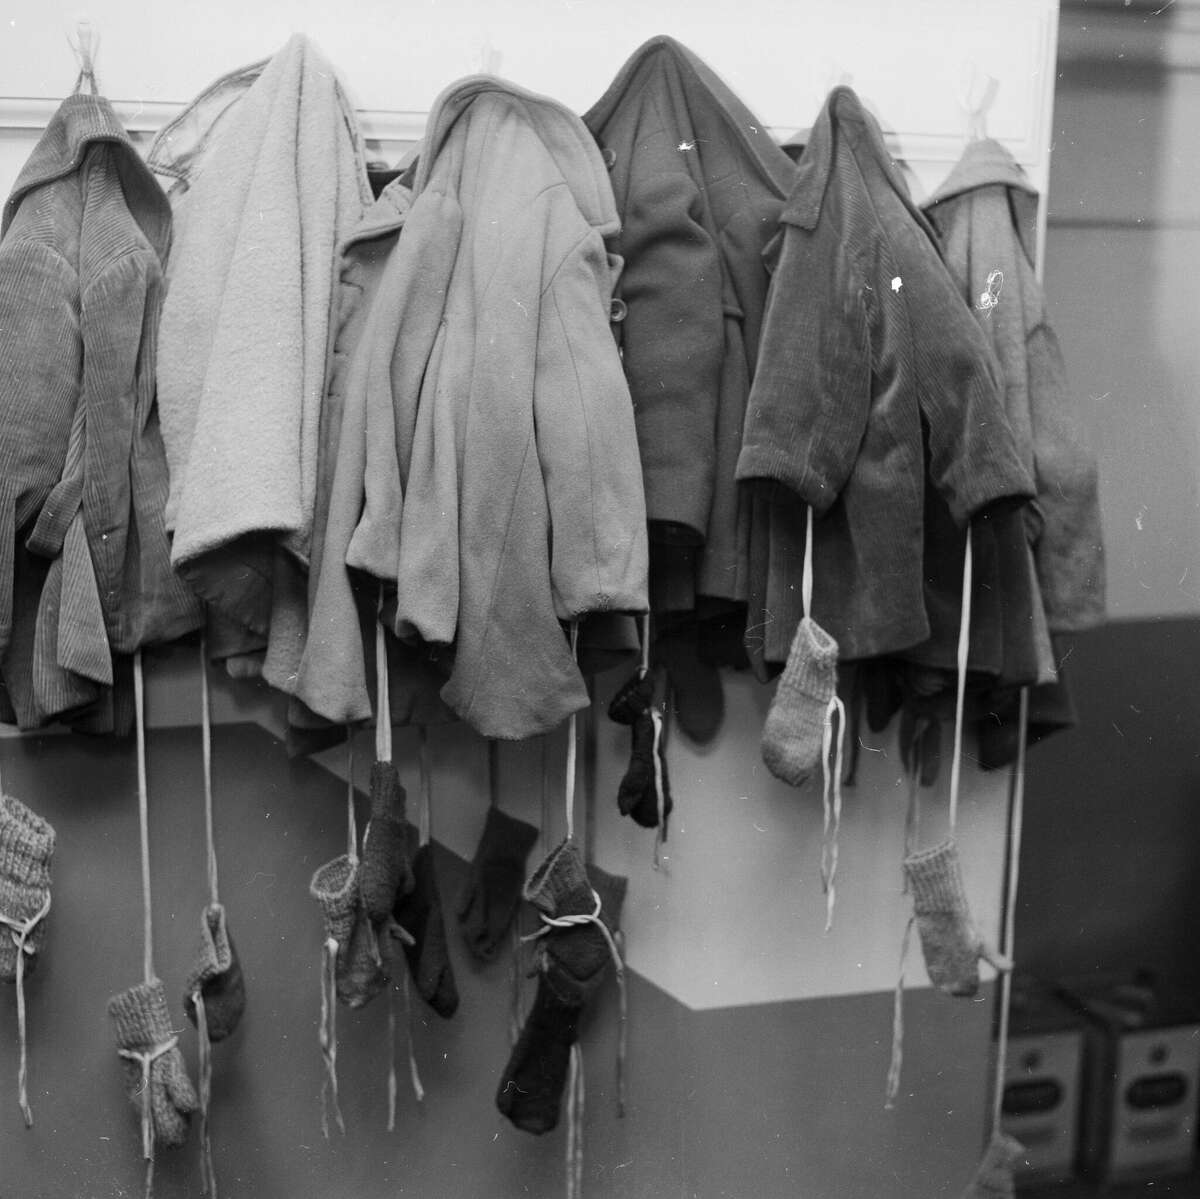 January 1958: A row of small coats and mittens hanging in the locker room of the Holborn Toddlers' Club in London. (Photo by Russell Knight/BIPs/Getty Images)